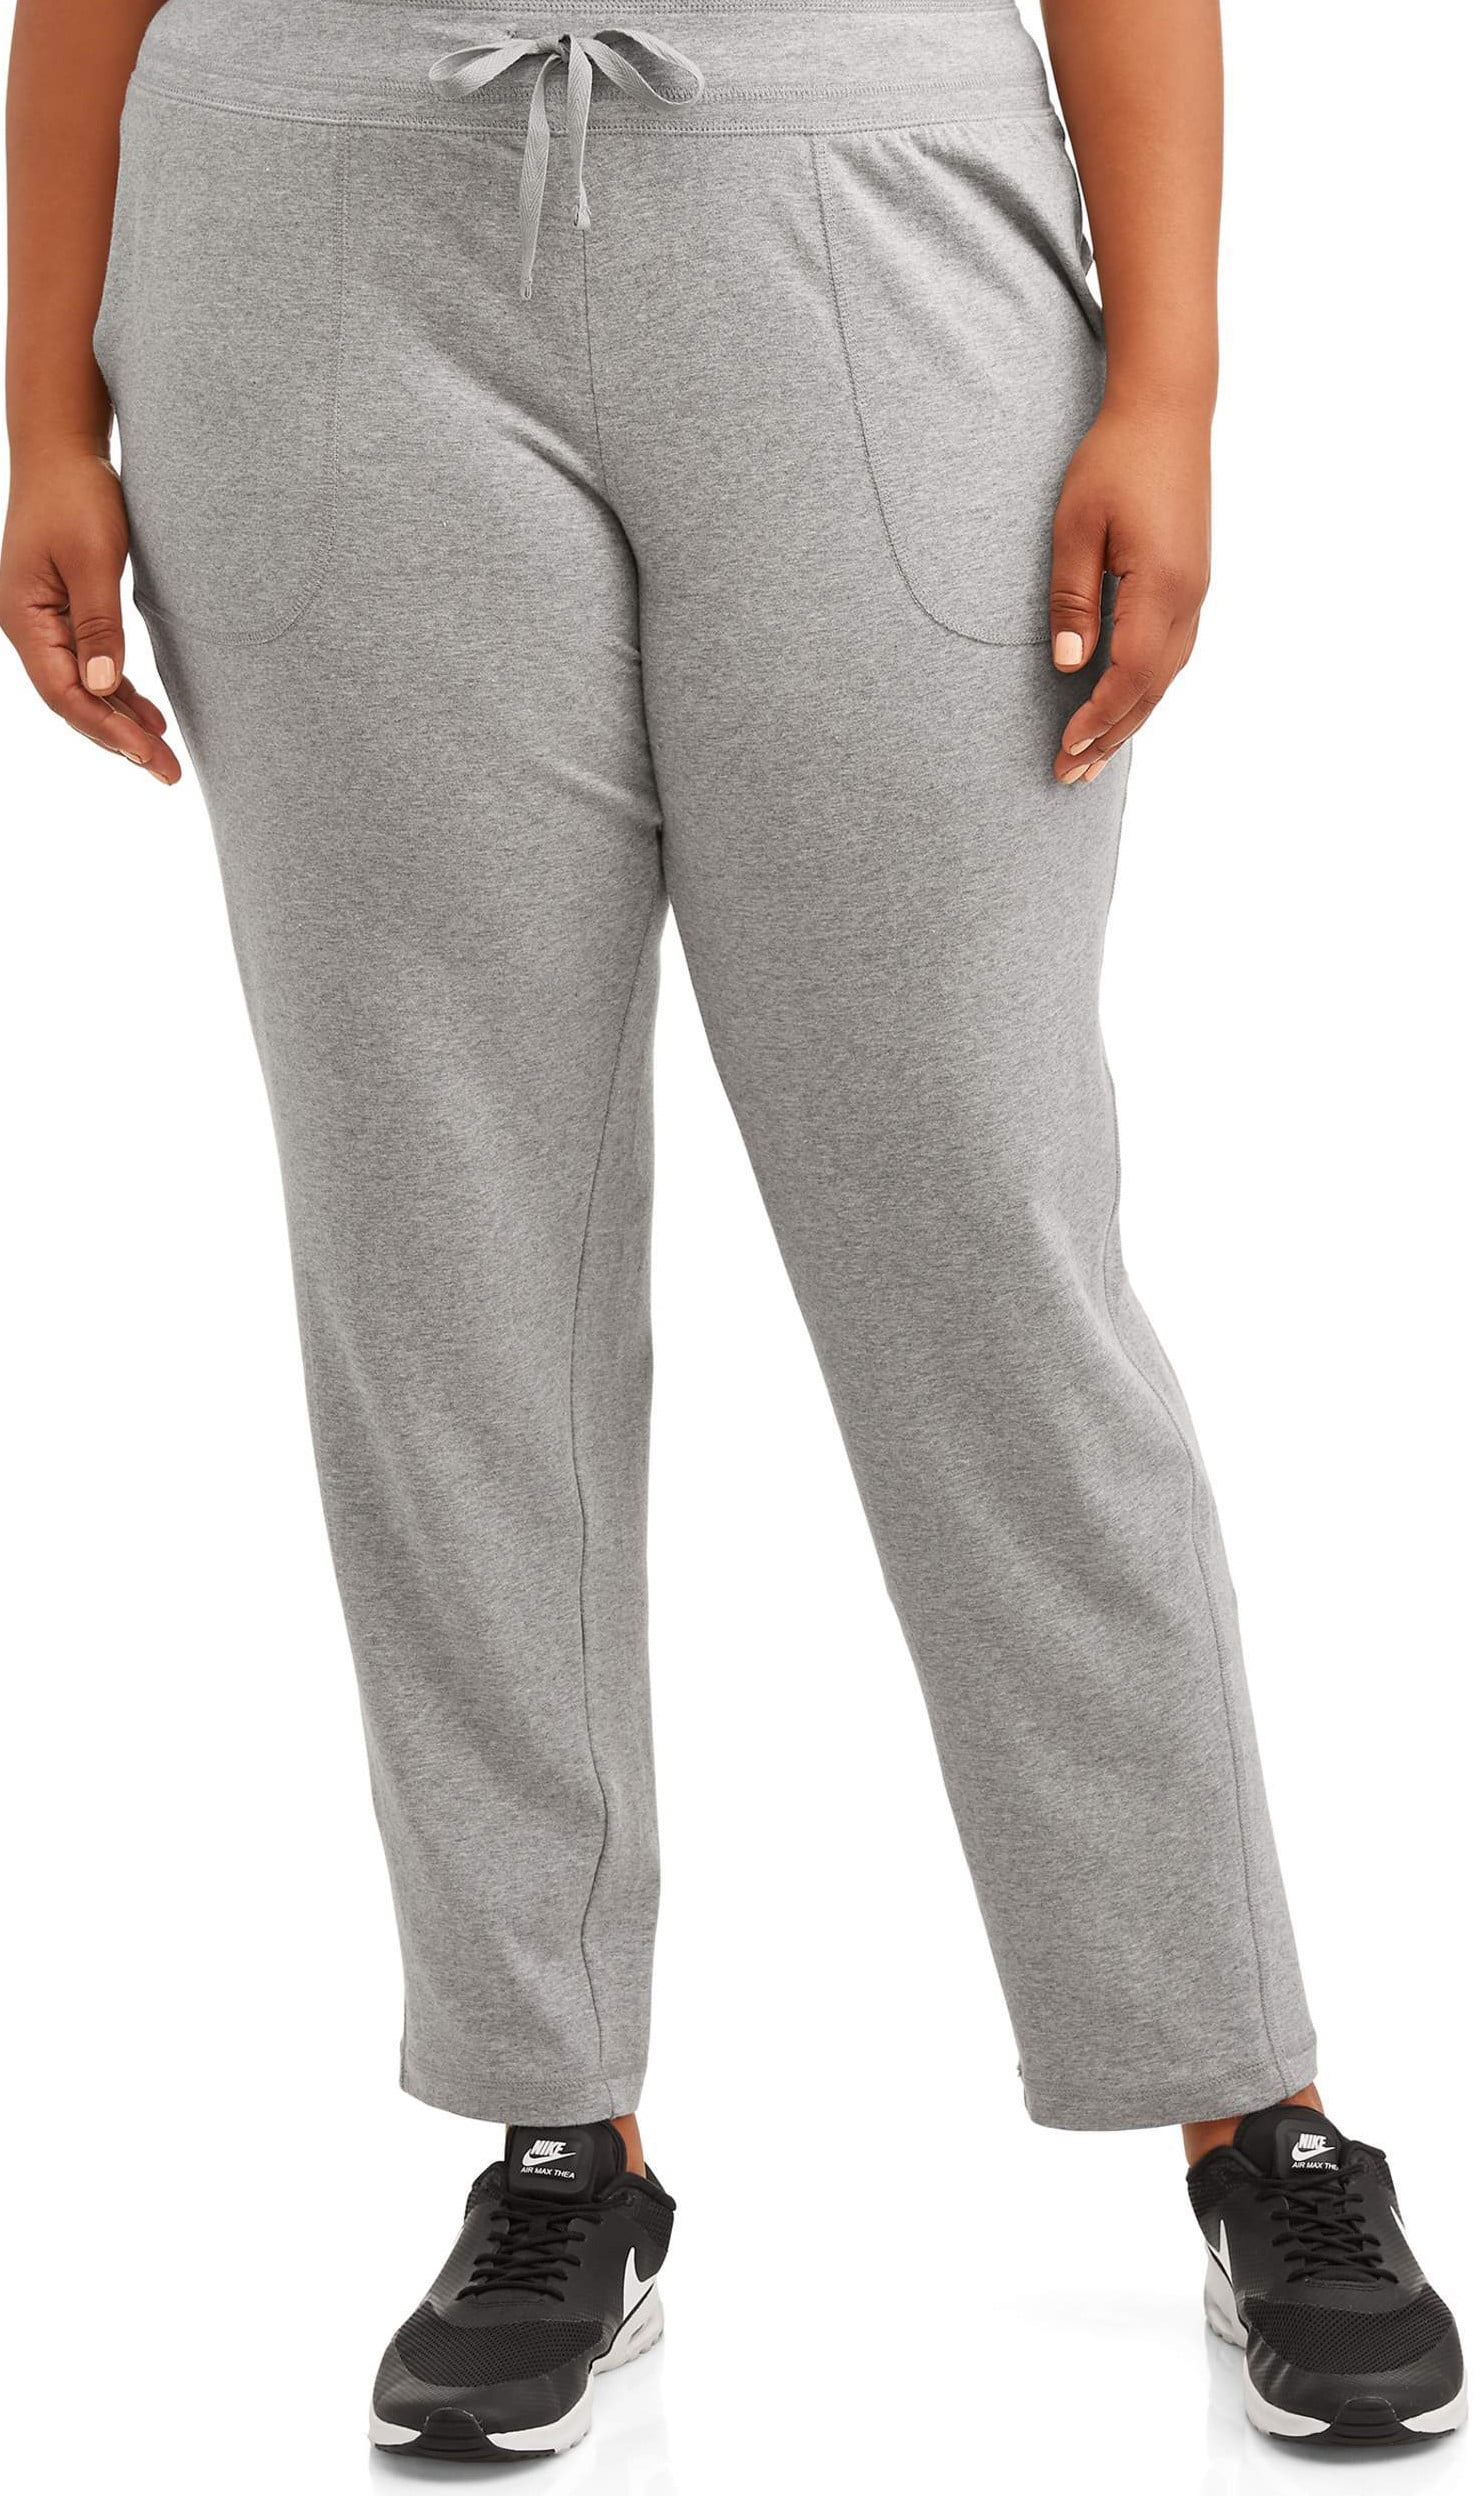 Athletic Works - Athletic Works Women's Plus Size Core Knit Pant ...